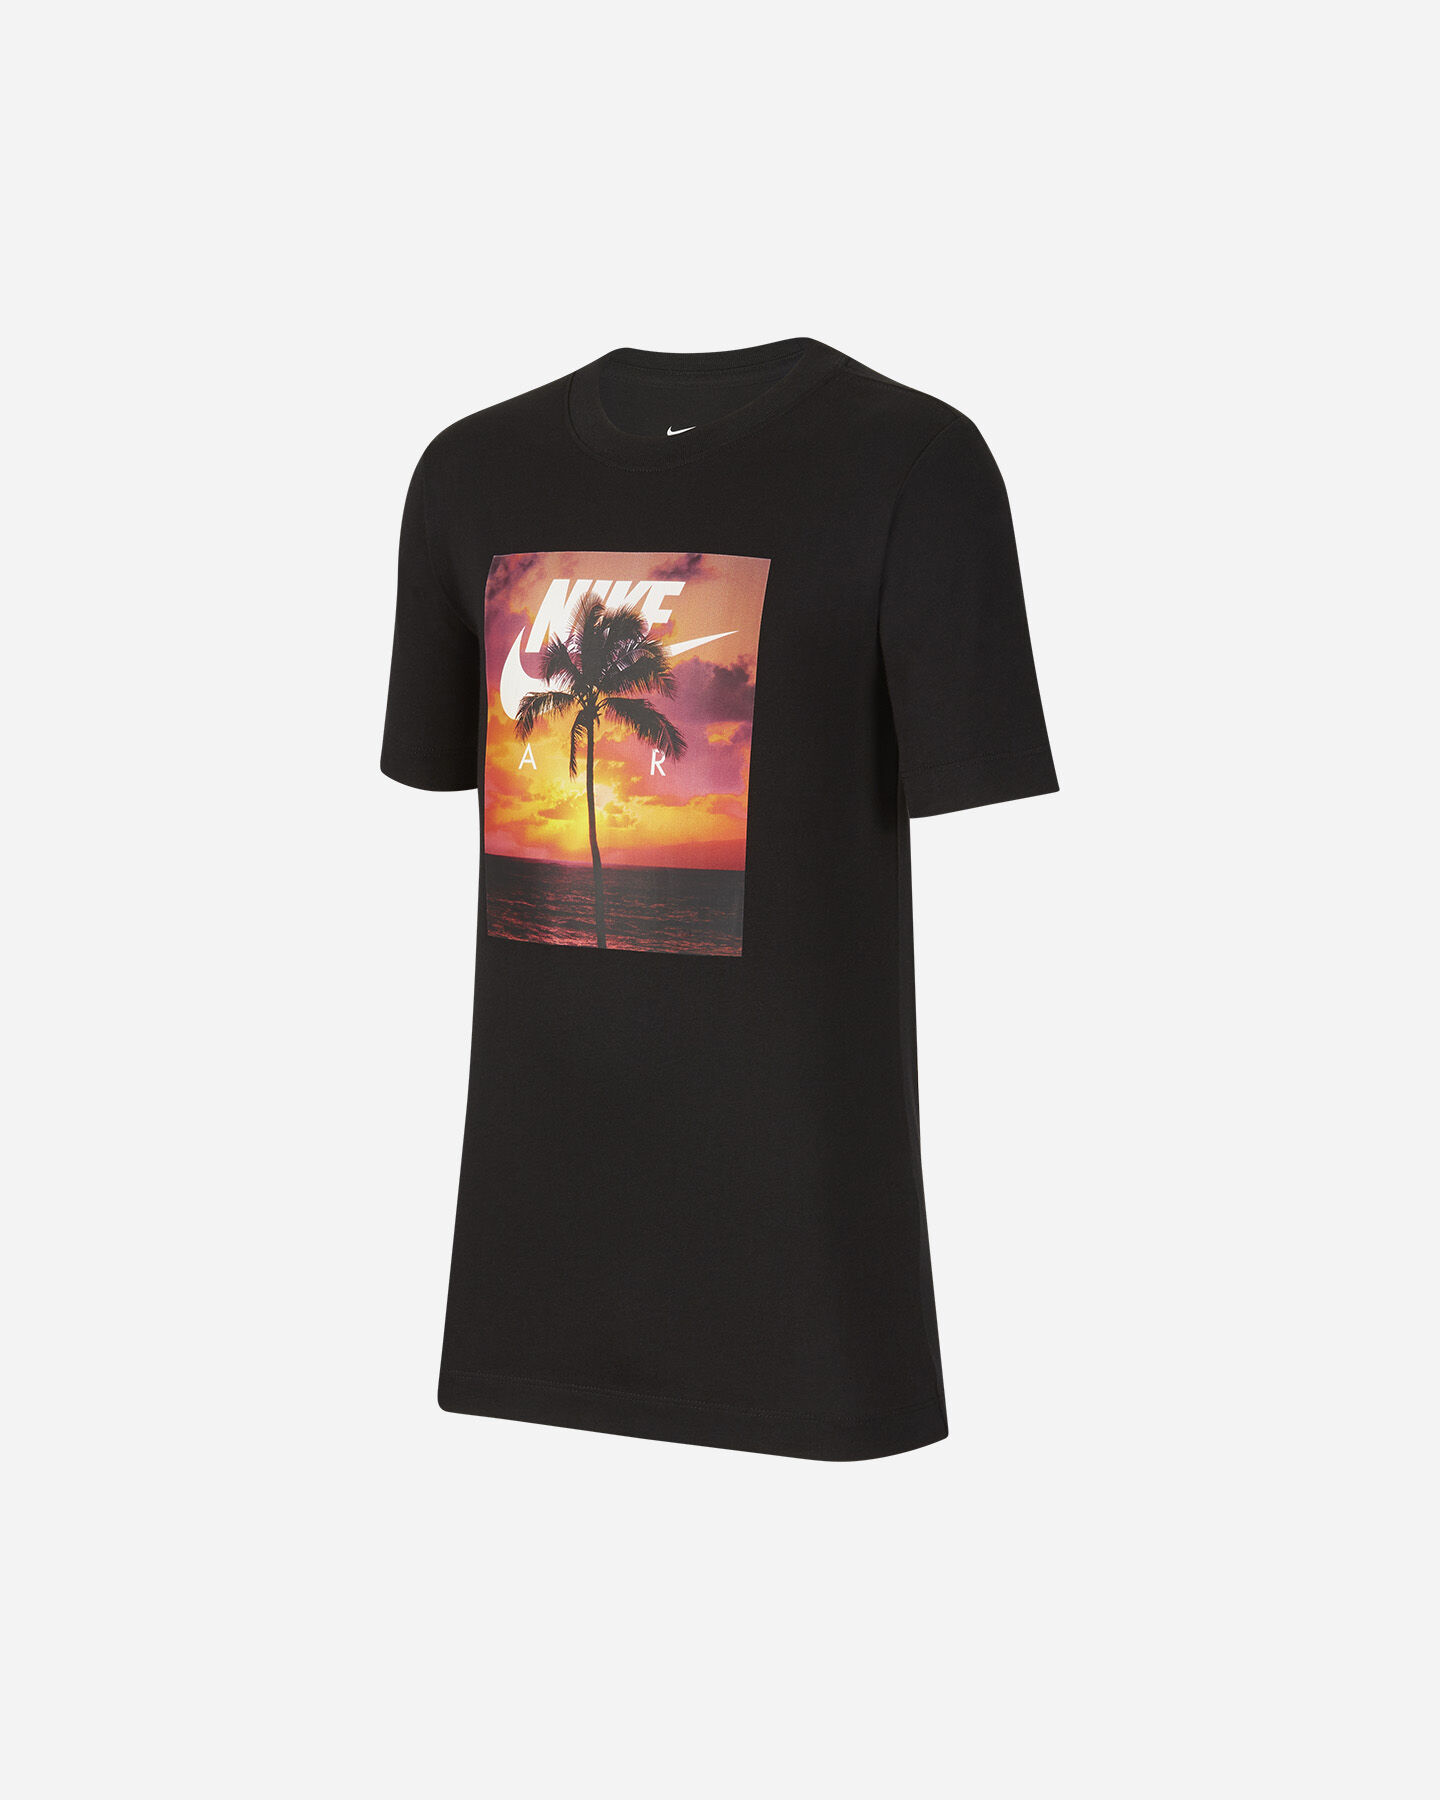  T-Shirt NIKE PHOTO PALM JR S5270257|010|S scatto 0